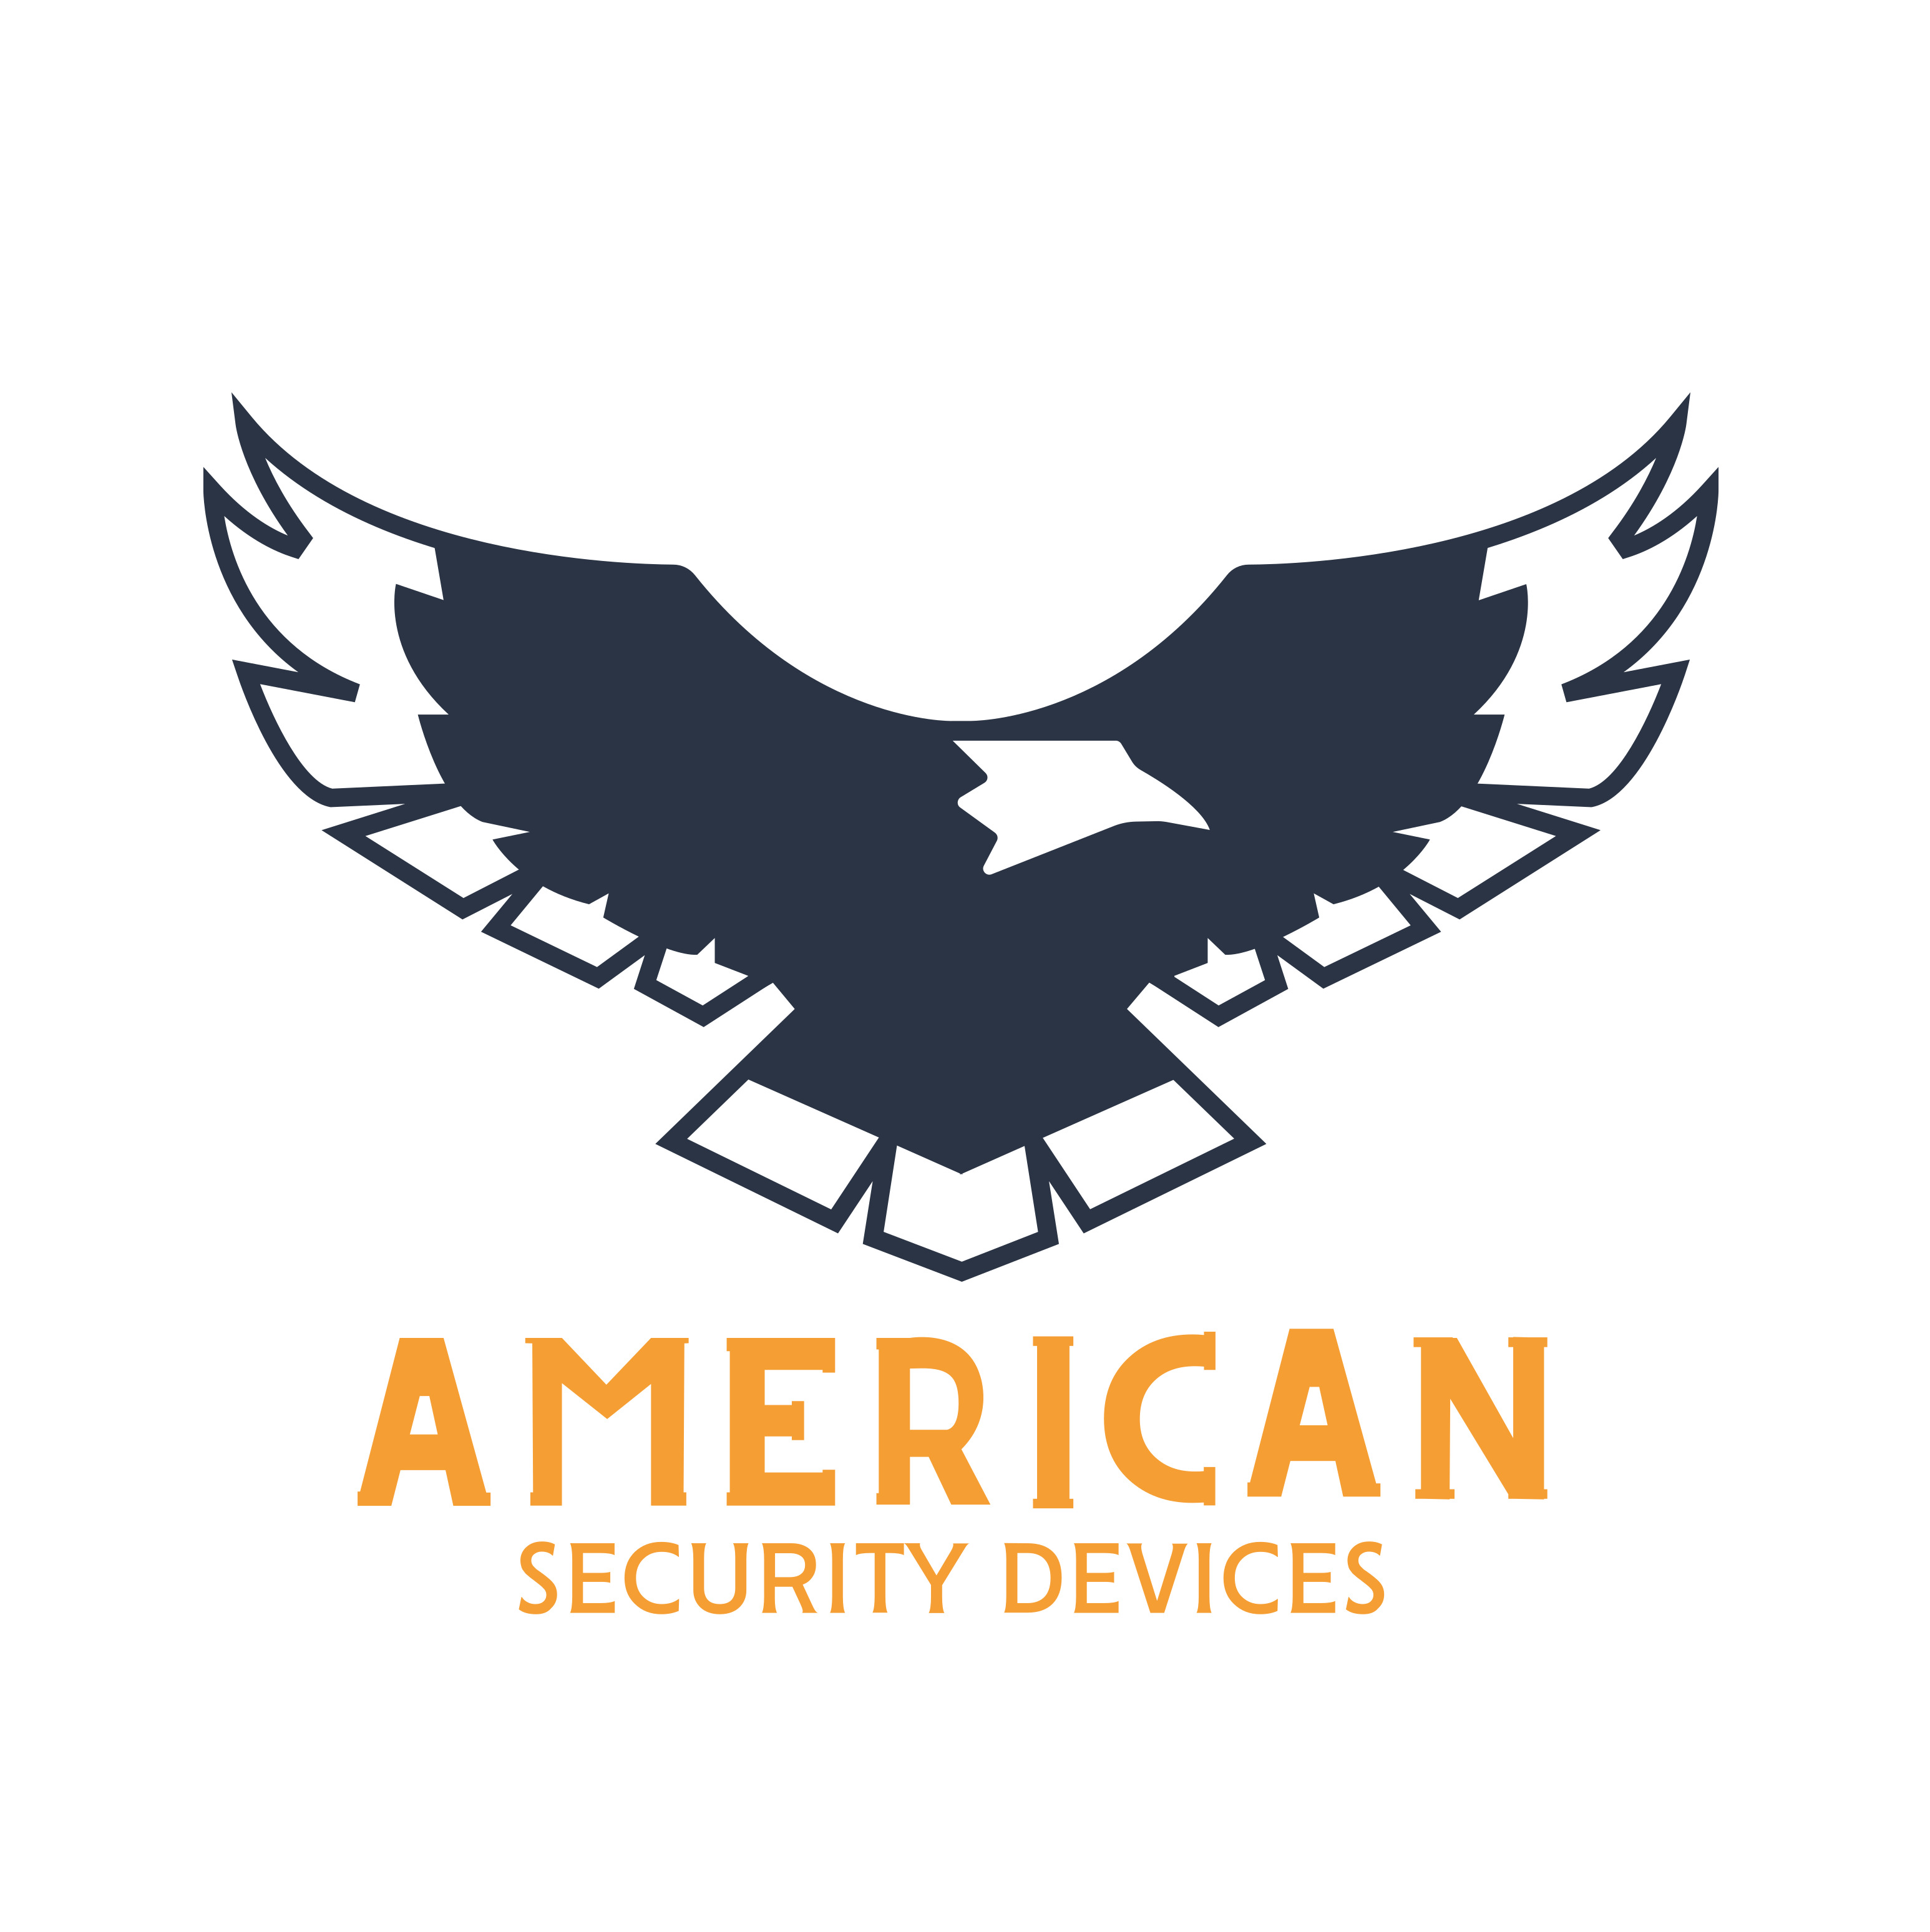 American Security Devices